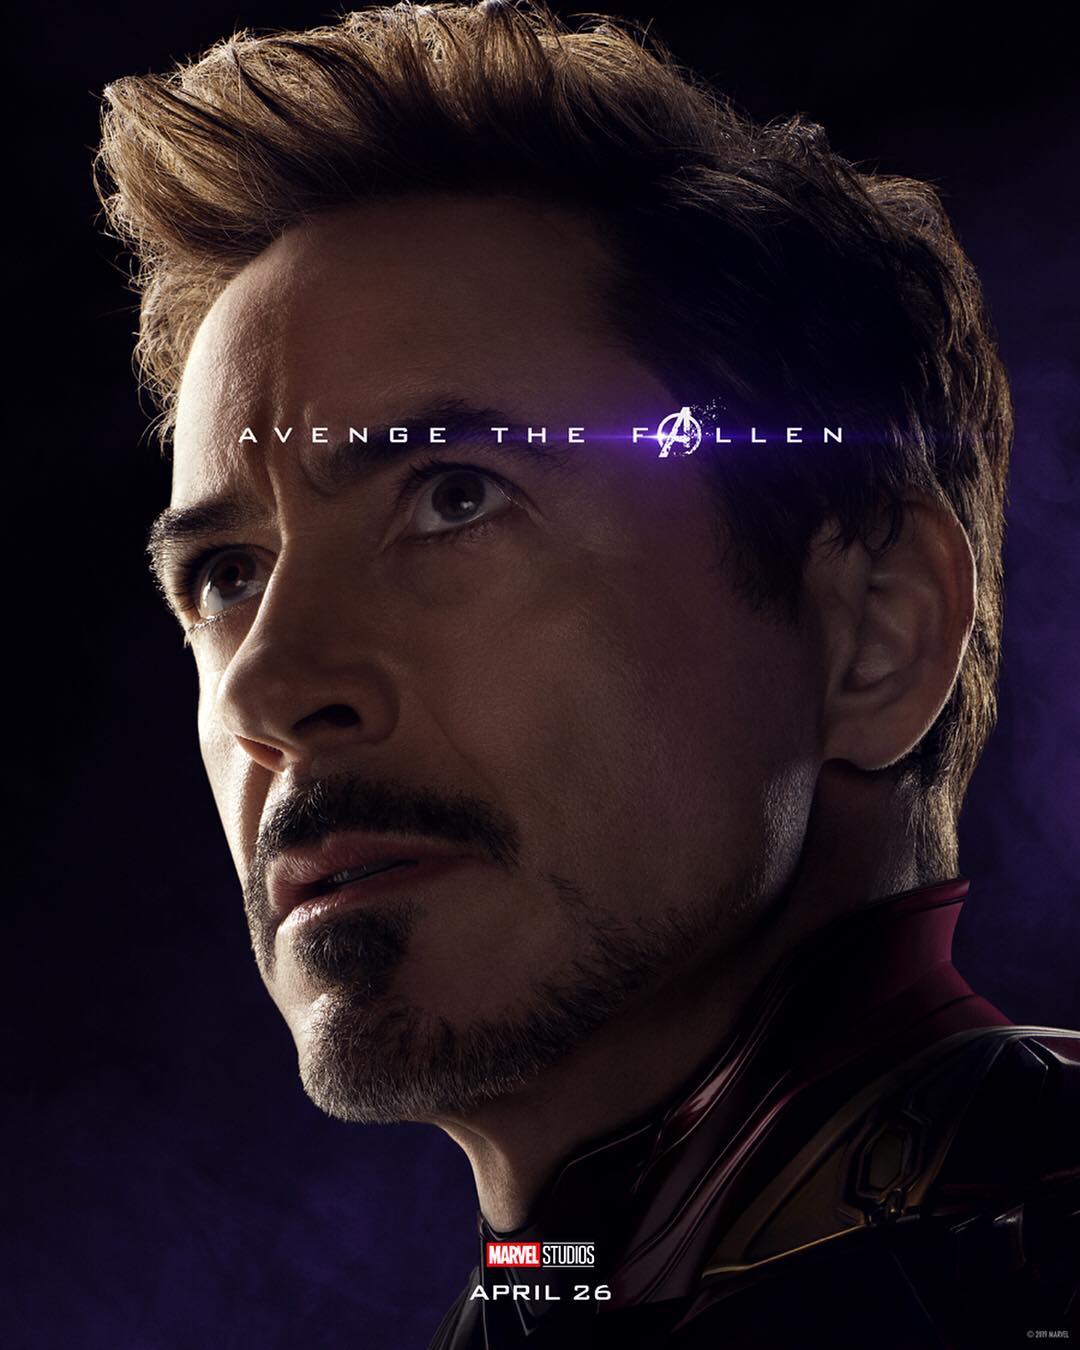 Avengers: Endgame Overseas Box Office Collection: Here's how much the MCU film earned this week